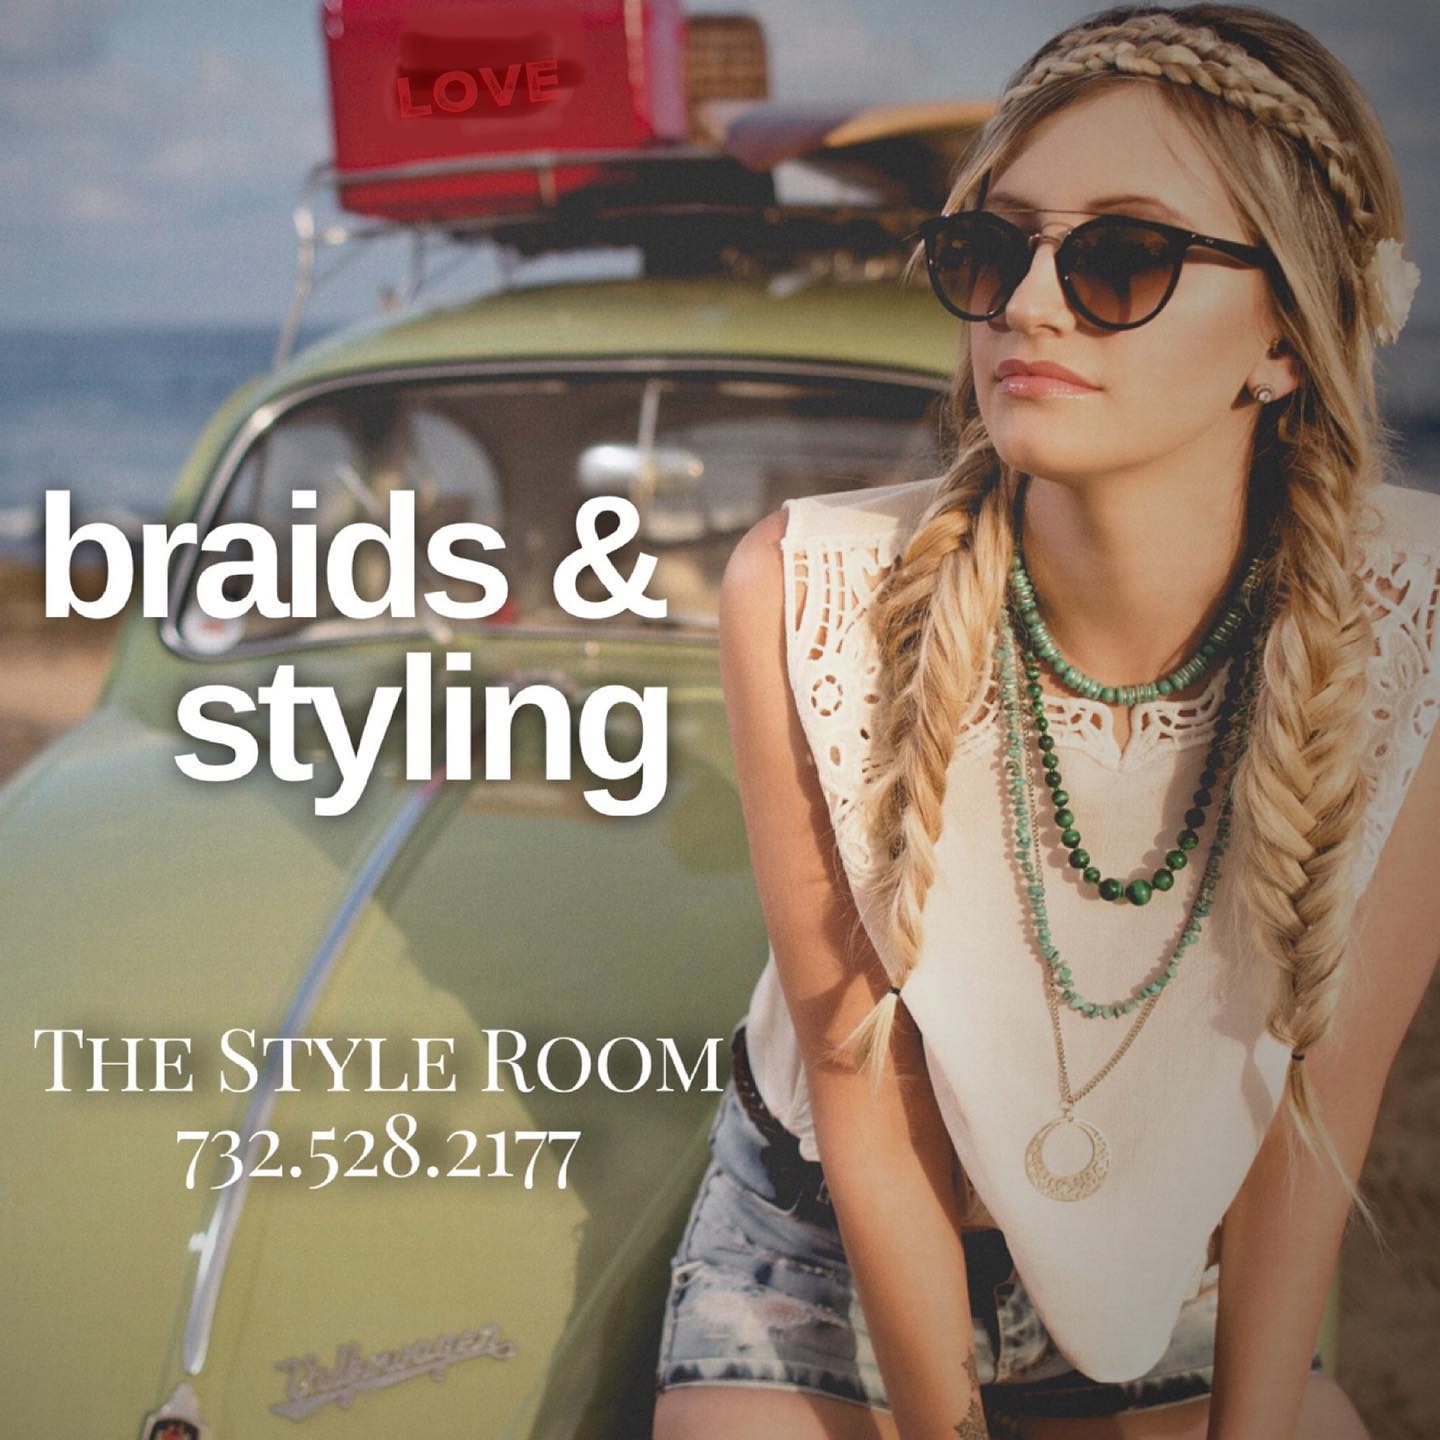 The Style Room 406 Union Ave, Brielle New Jersey 08730